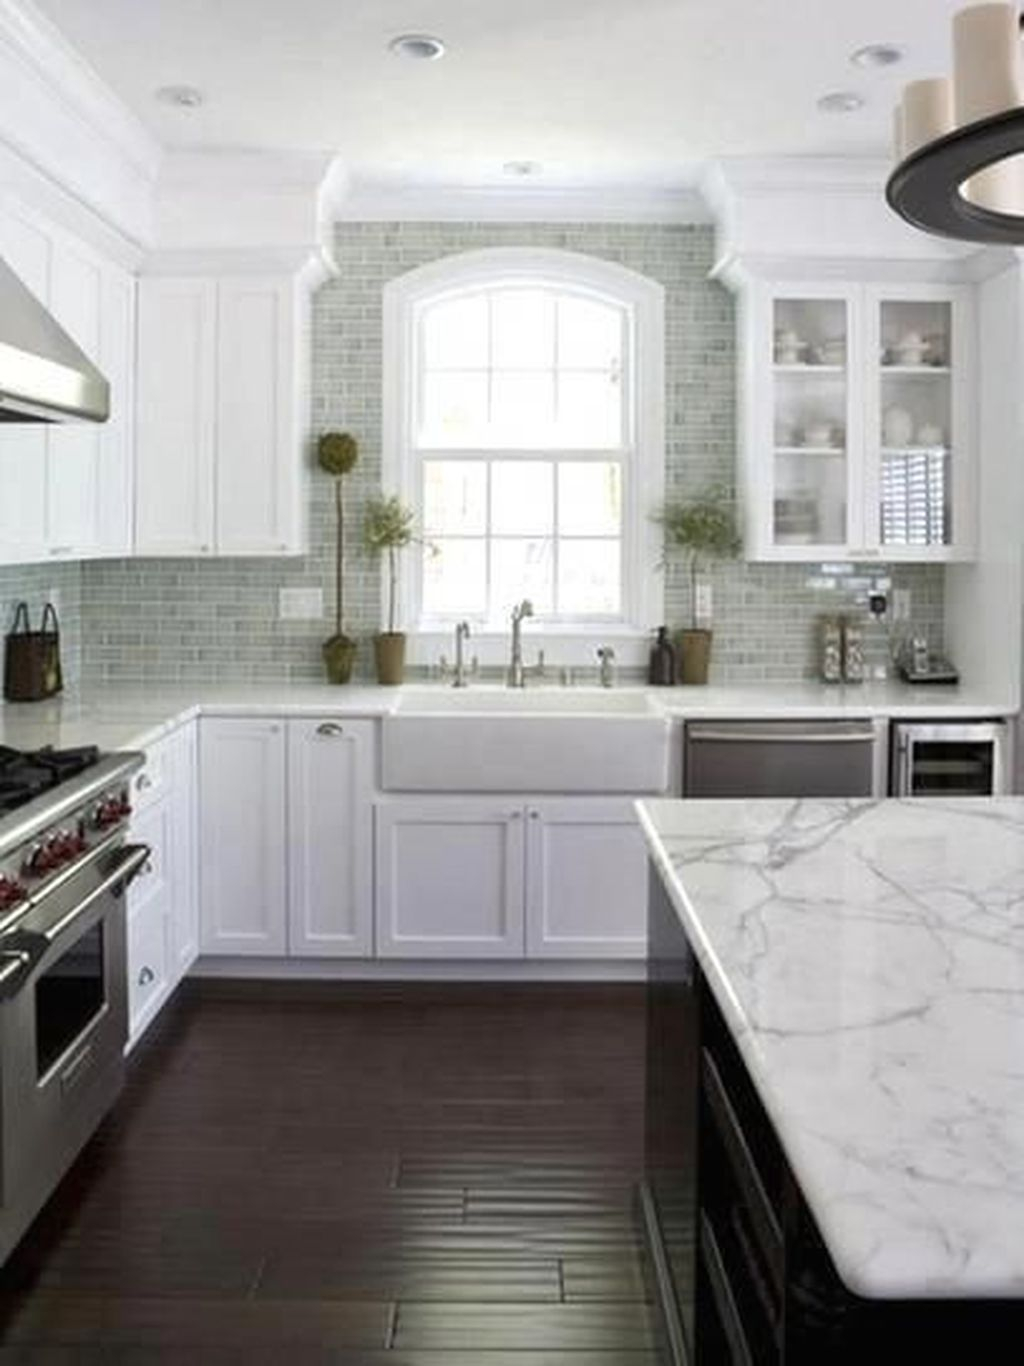 Best Small Kitchen Remodel Design Ideas That Low Cost And Easy To Copy 12